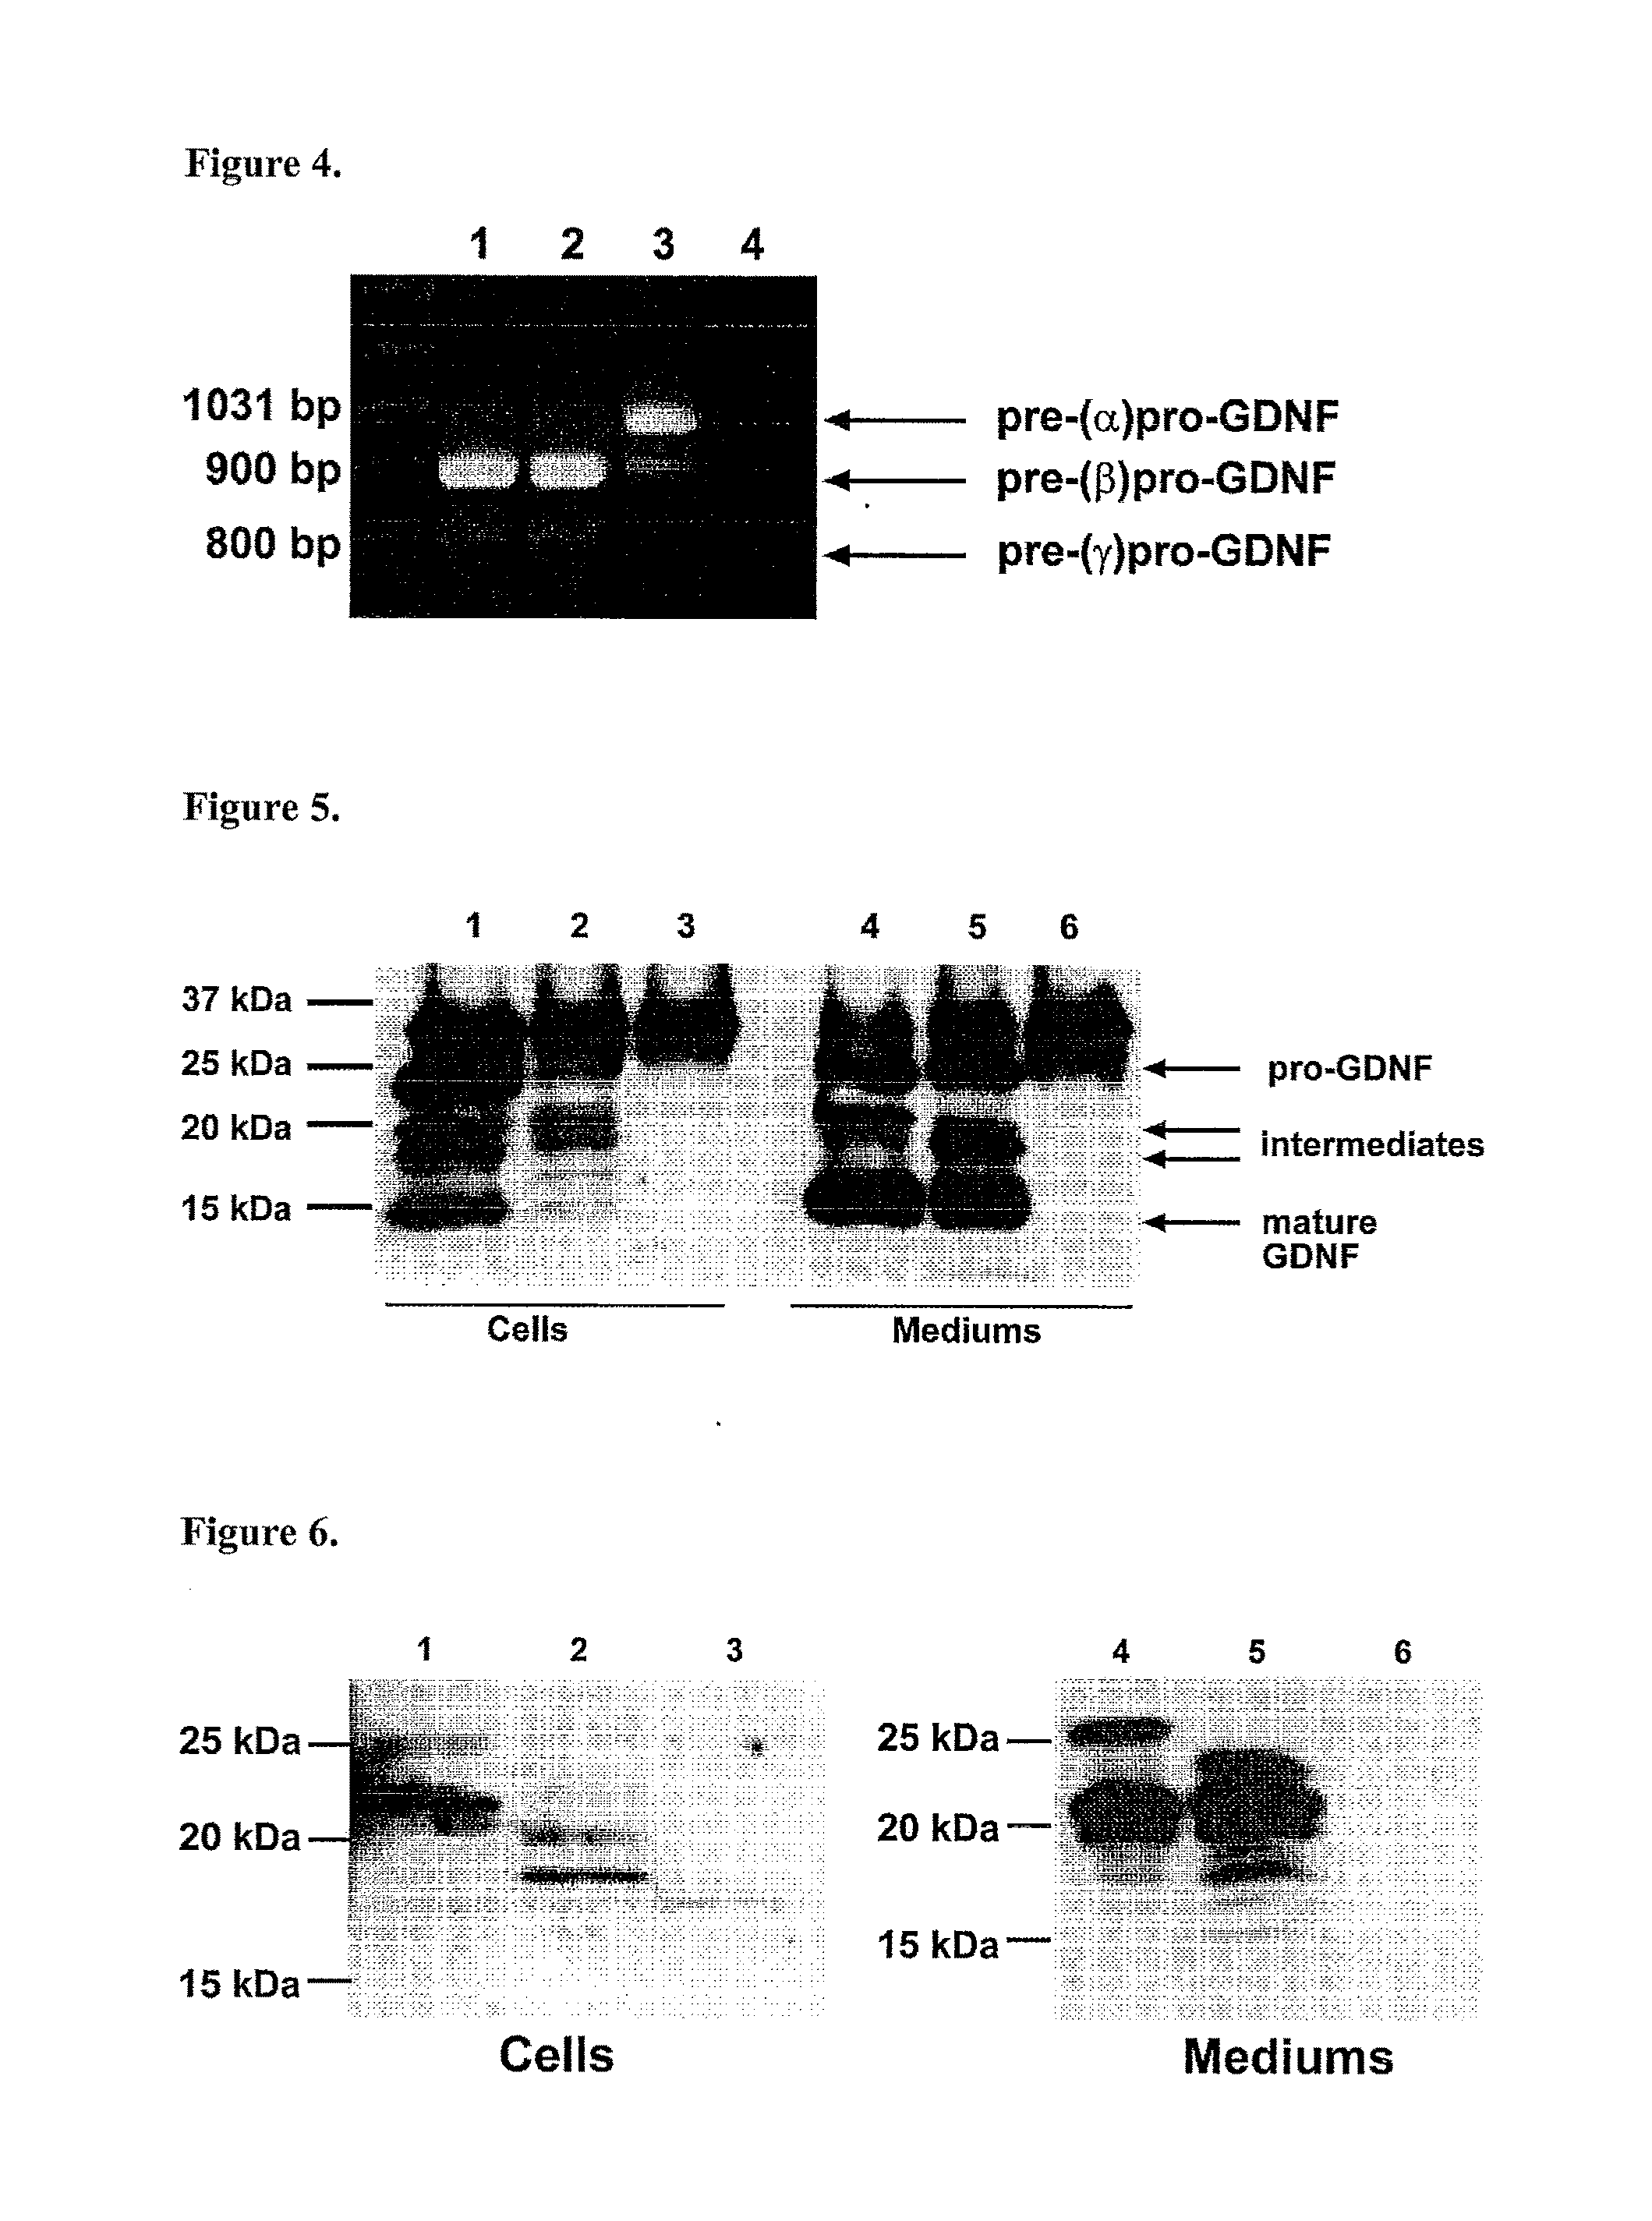 Splice variants of gdnf and uses thereof